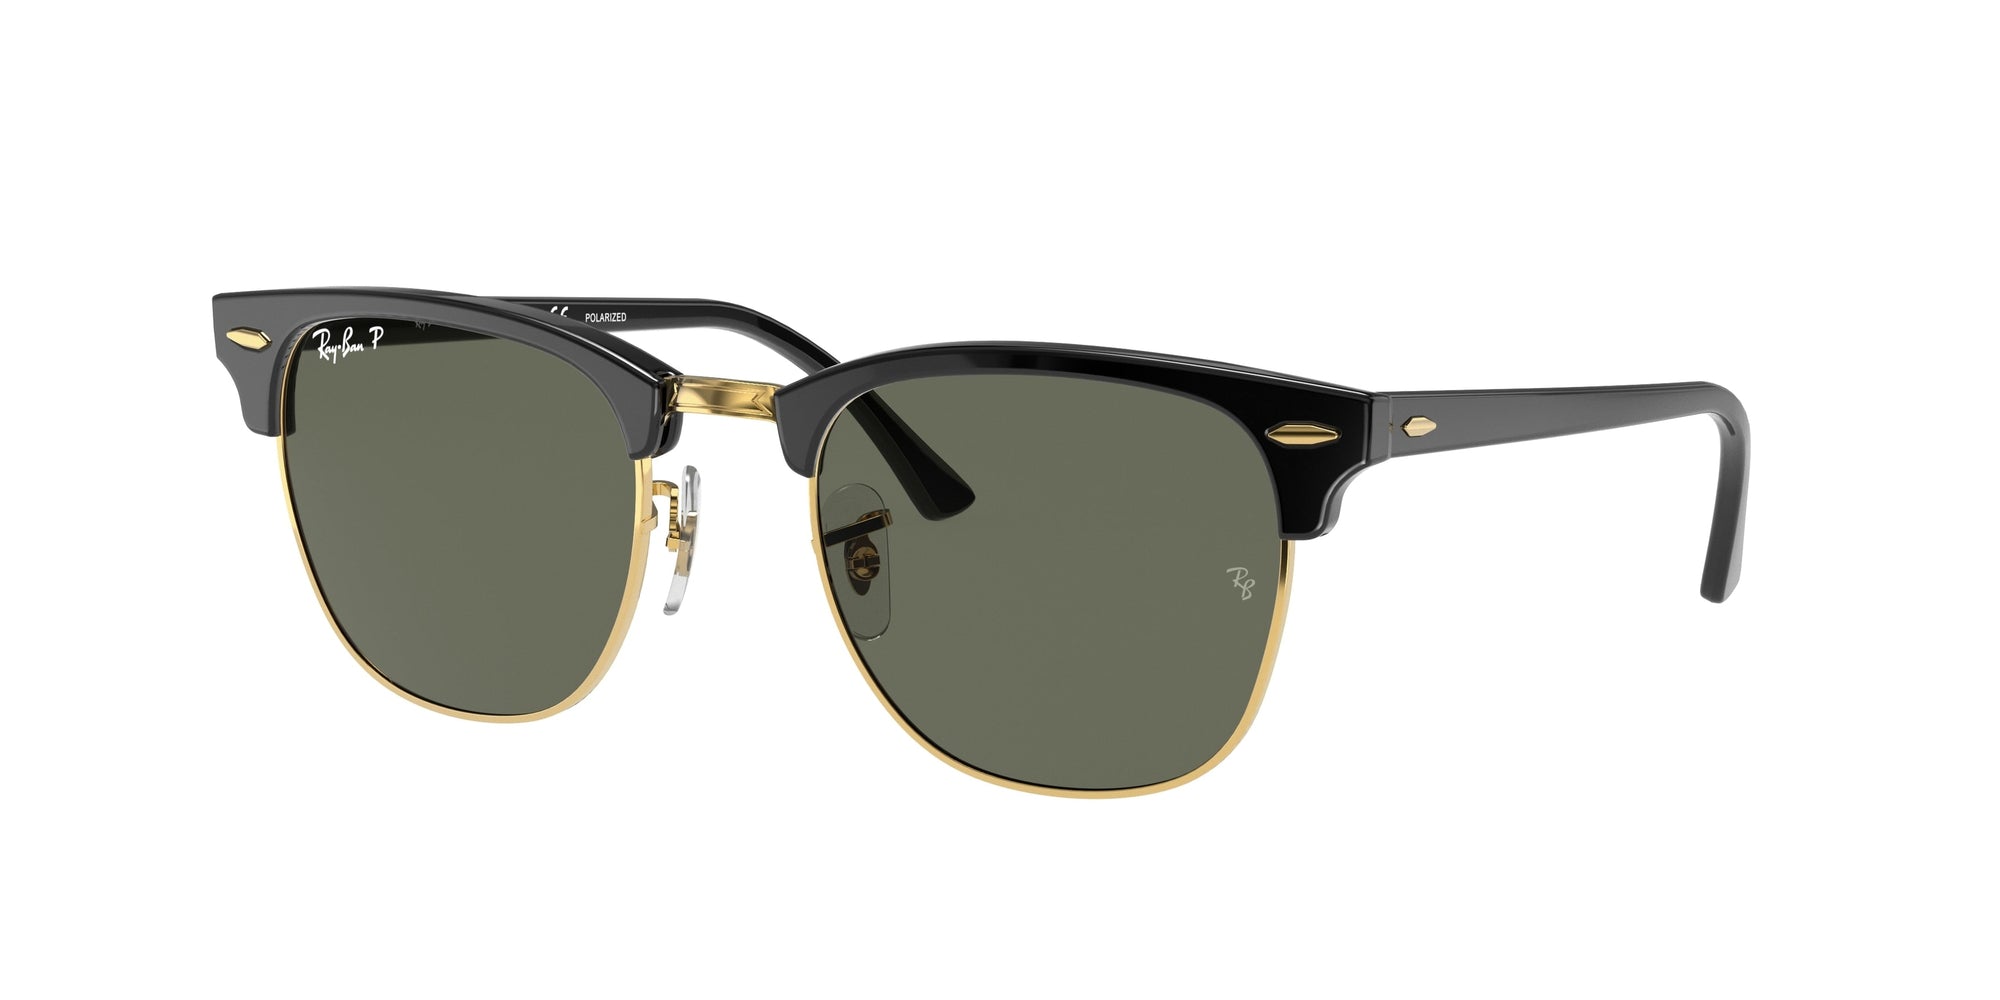 RAY-BAN CLUBMASTER RB3016